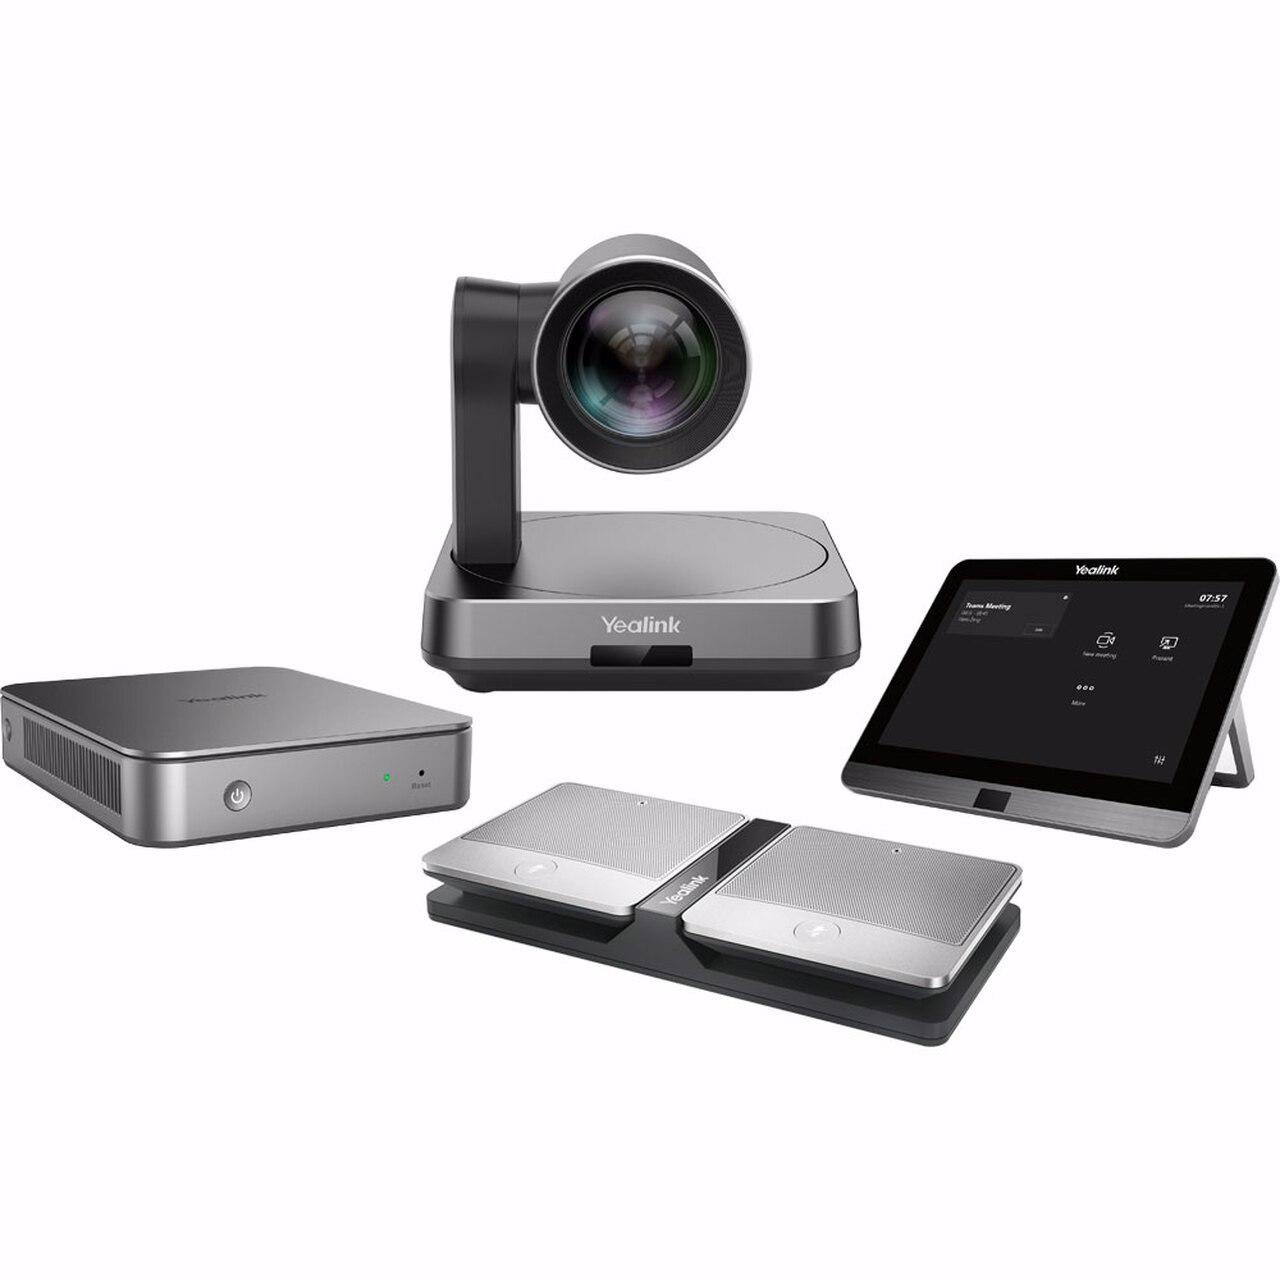 Yealink MVC640 Room System For Microsoft Teams And SFB, Mini-PC Ii, 8'' Touch Screen, Uvc84 12X Optical Zoom 4K Camera, 1X WPP20, 2X CPW90 Wireless MIC's And Soundbar (Includes 2 Year Ams)